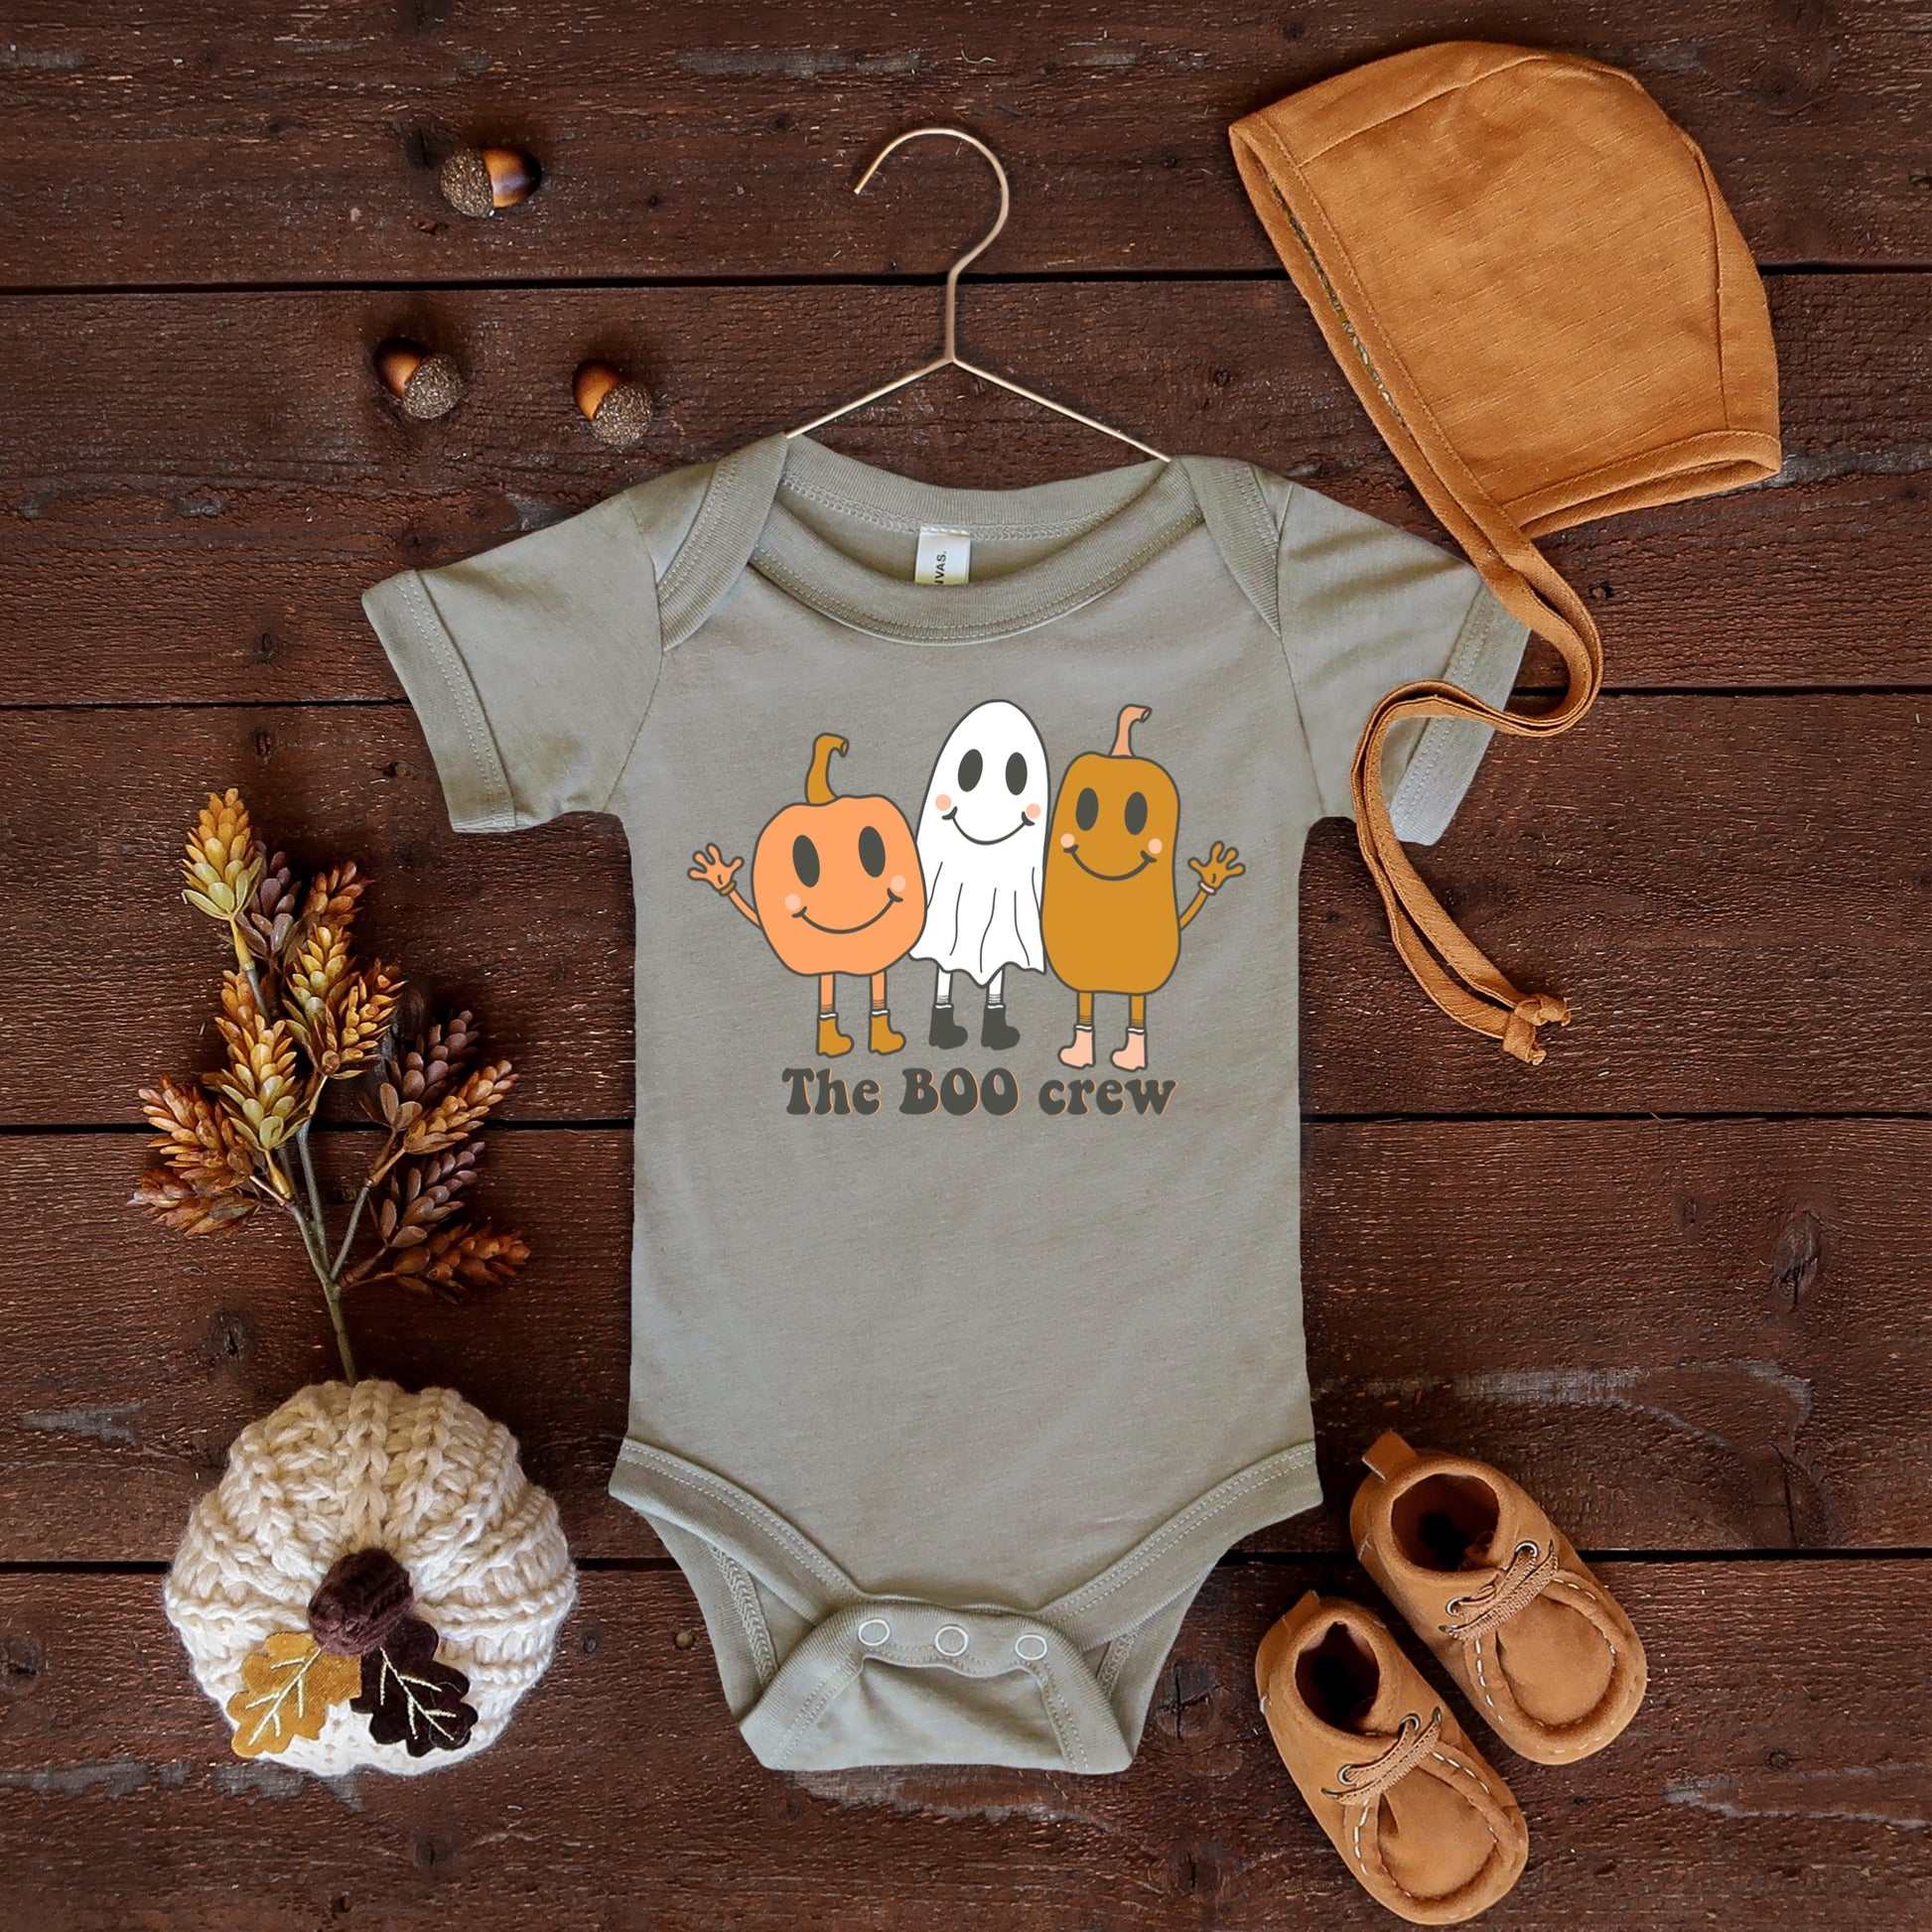 Pumpkins and Ghosts "The Boo Crew" iron on heat transfer.